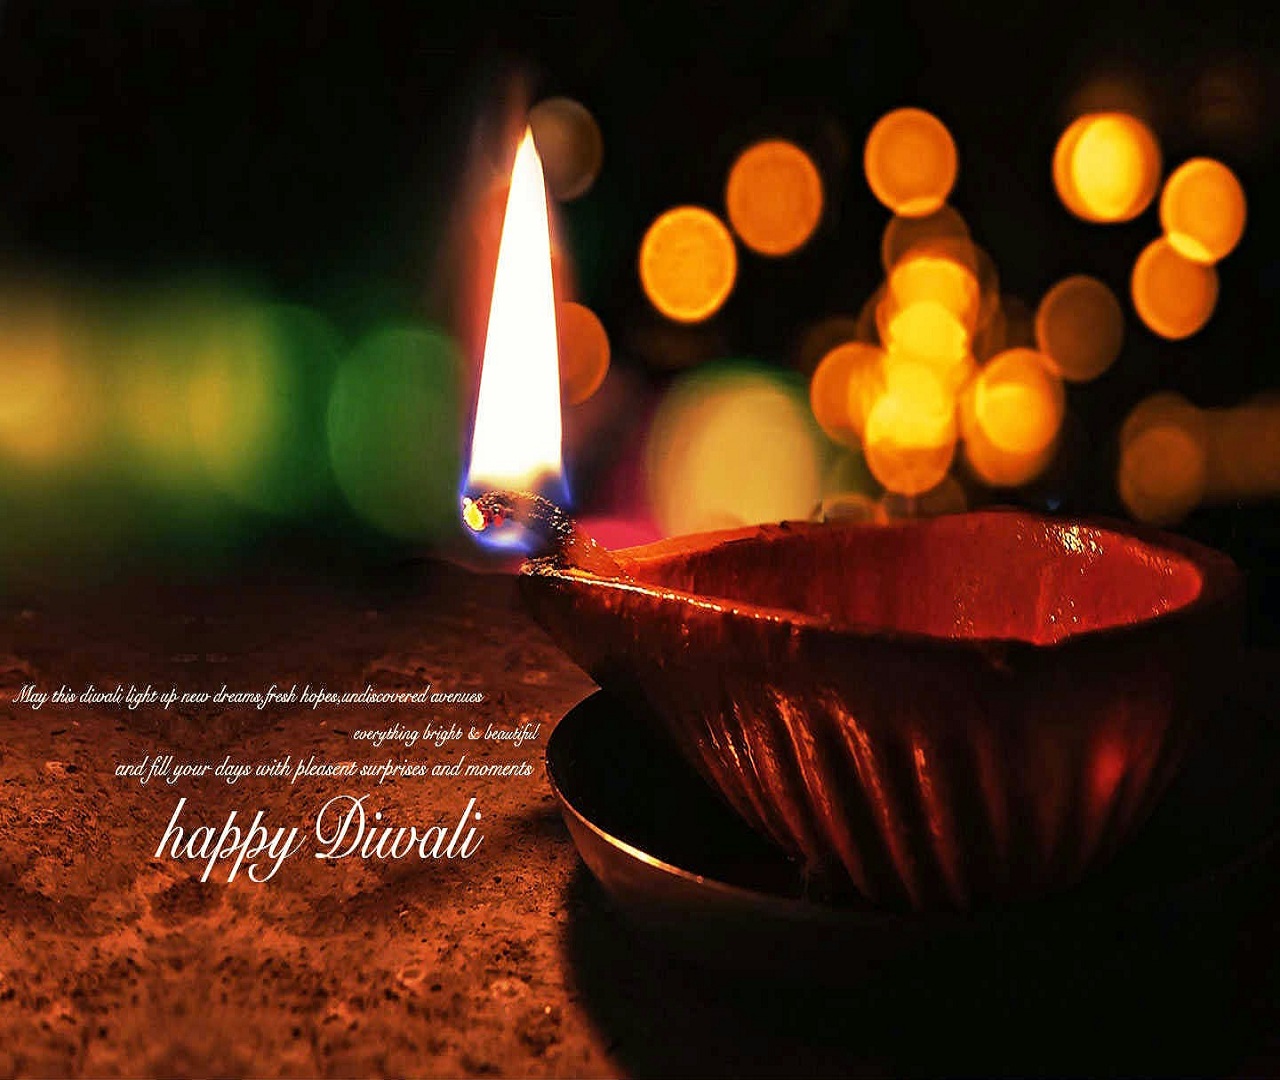 Happy Diwali Wishes Quotations